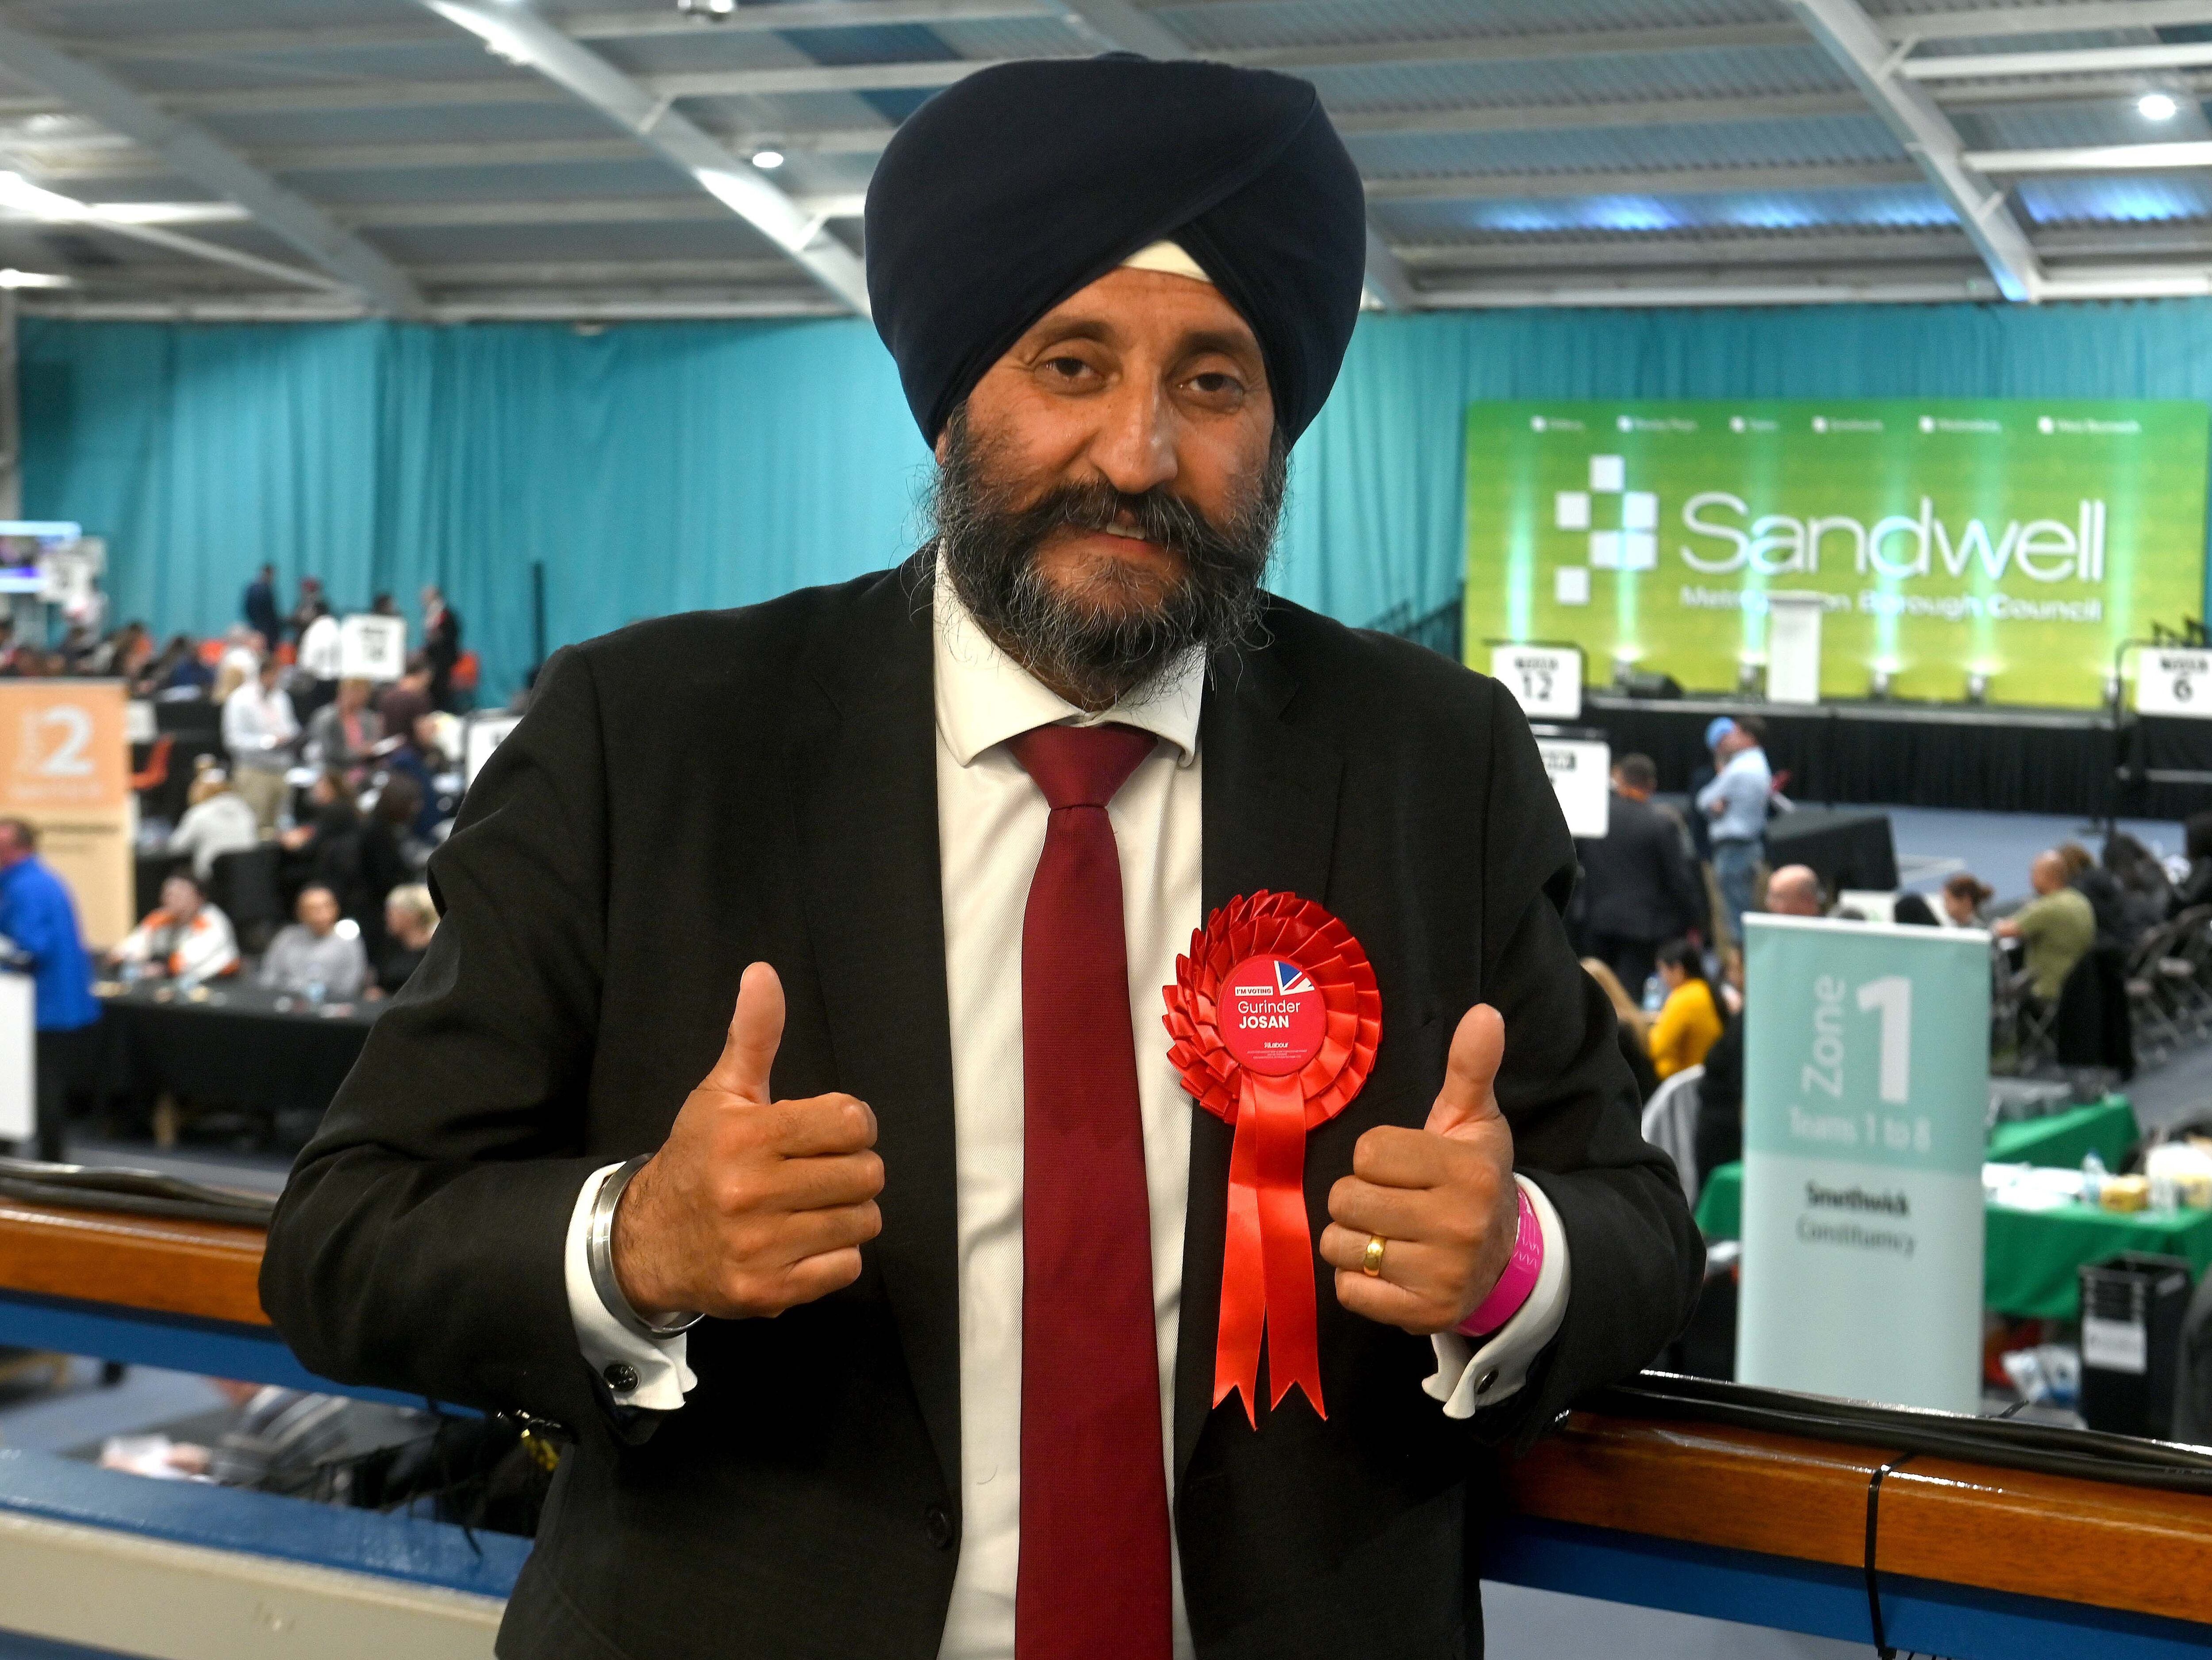 Smethwick election result: Labour's Gurinder Singh Josan takes newly-reformed seat